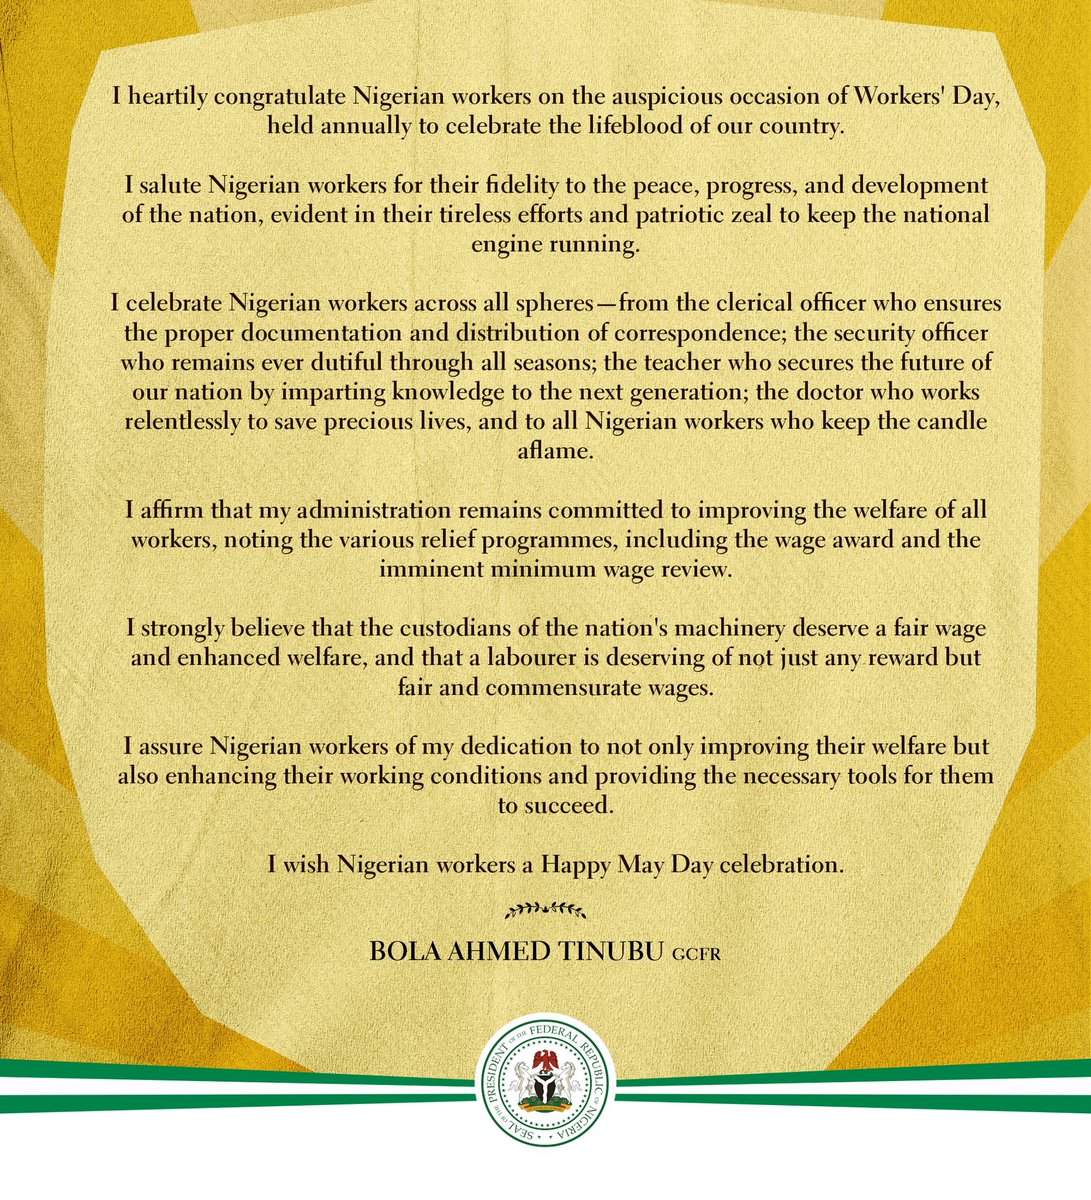 I heartily congratulate Nigerian workers on the auspicious occasion of Workers' Day, held annually to celebrate the lifeblood of our country. I salute Nigerian workers for their fidelity to the peace, progress, and development of the nation, evident in their tireless efforts and…